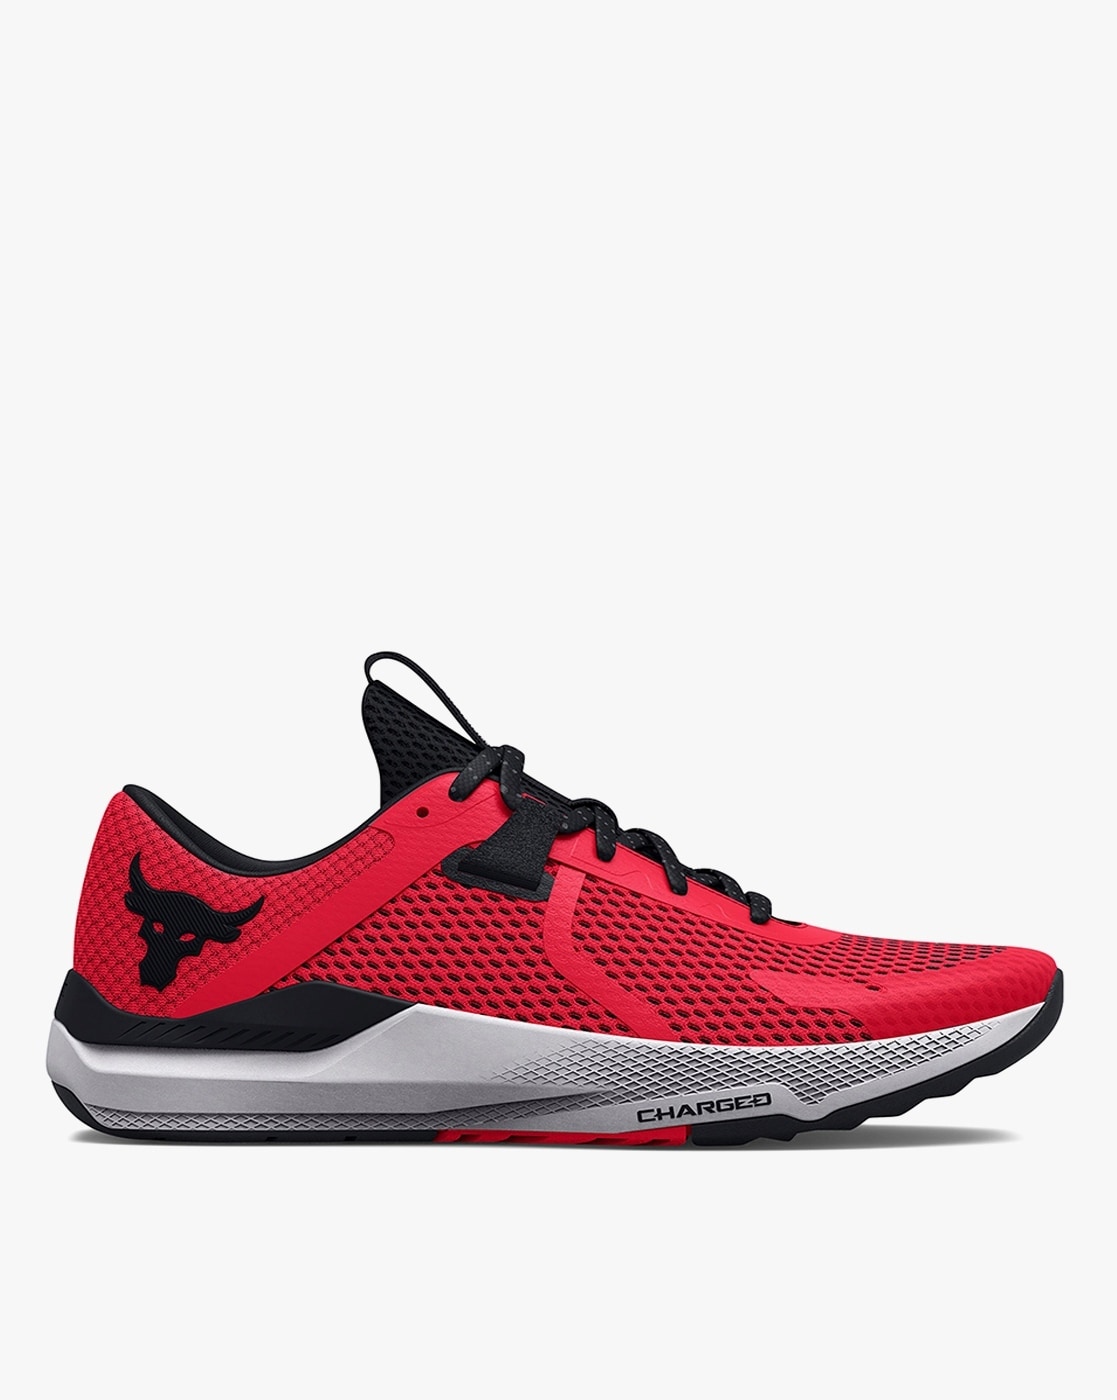 New UA Under Armour Project Rock BSR 2 UFC Shoes Mens Size 13 Red